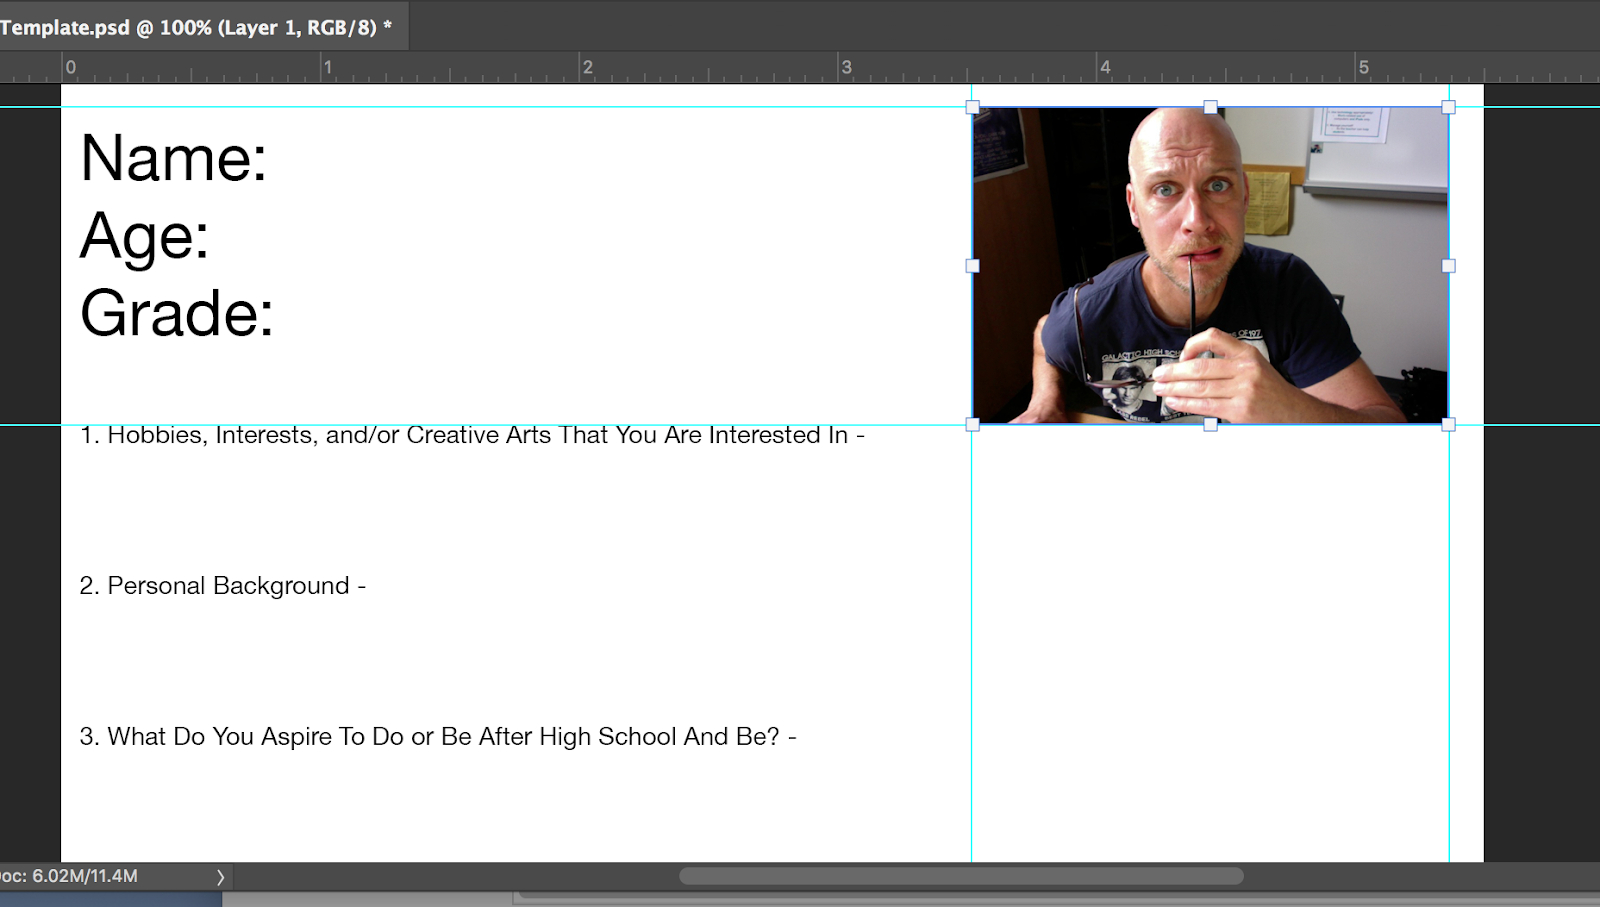 Working With Layers In Photoshop Cc To Build Your Punkt Id Card Throughout High School Id Card Template